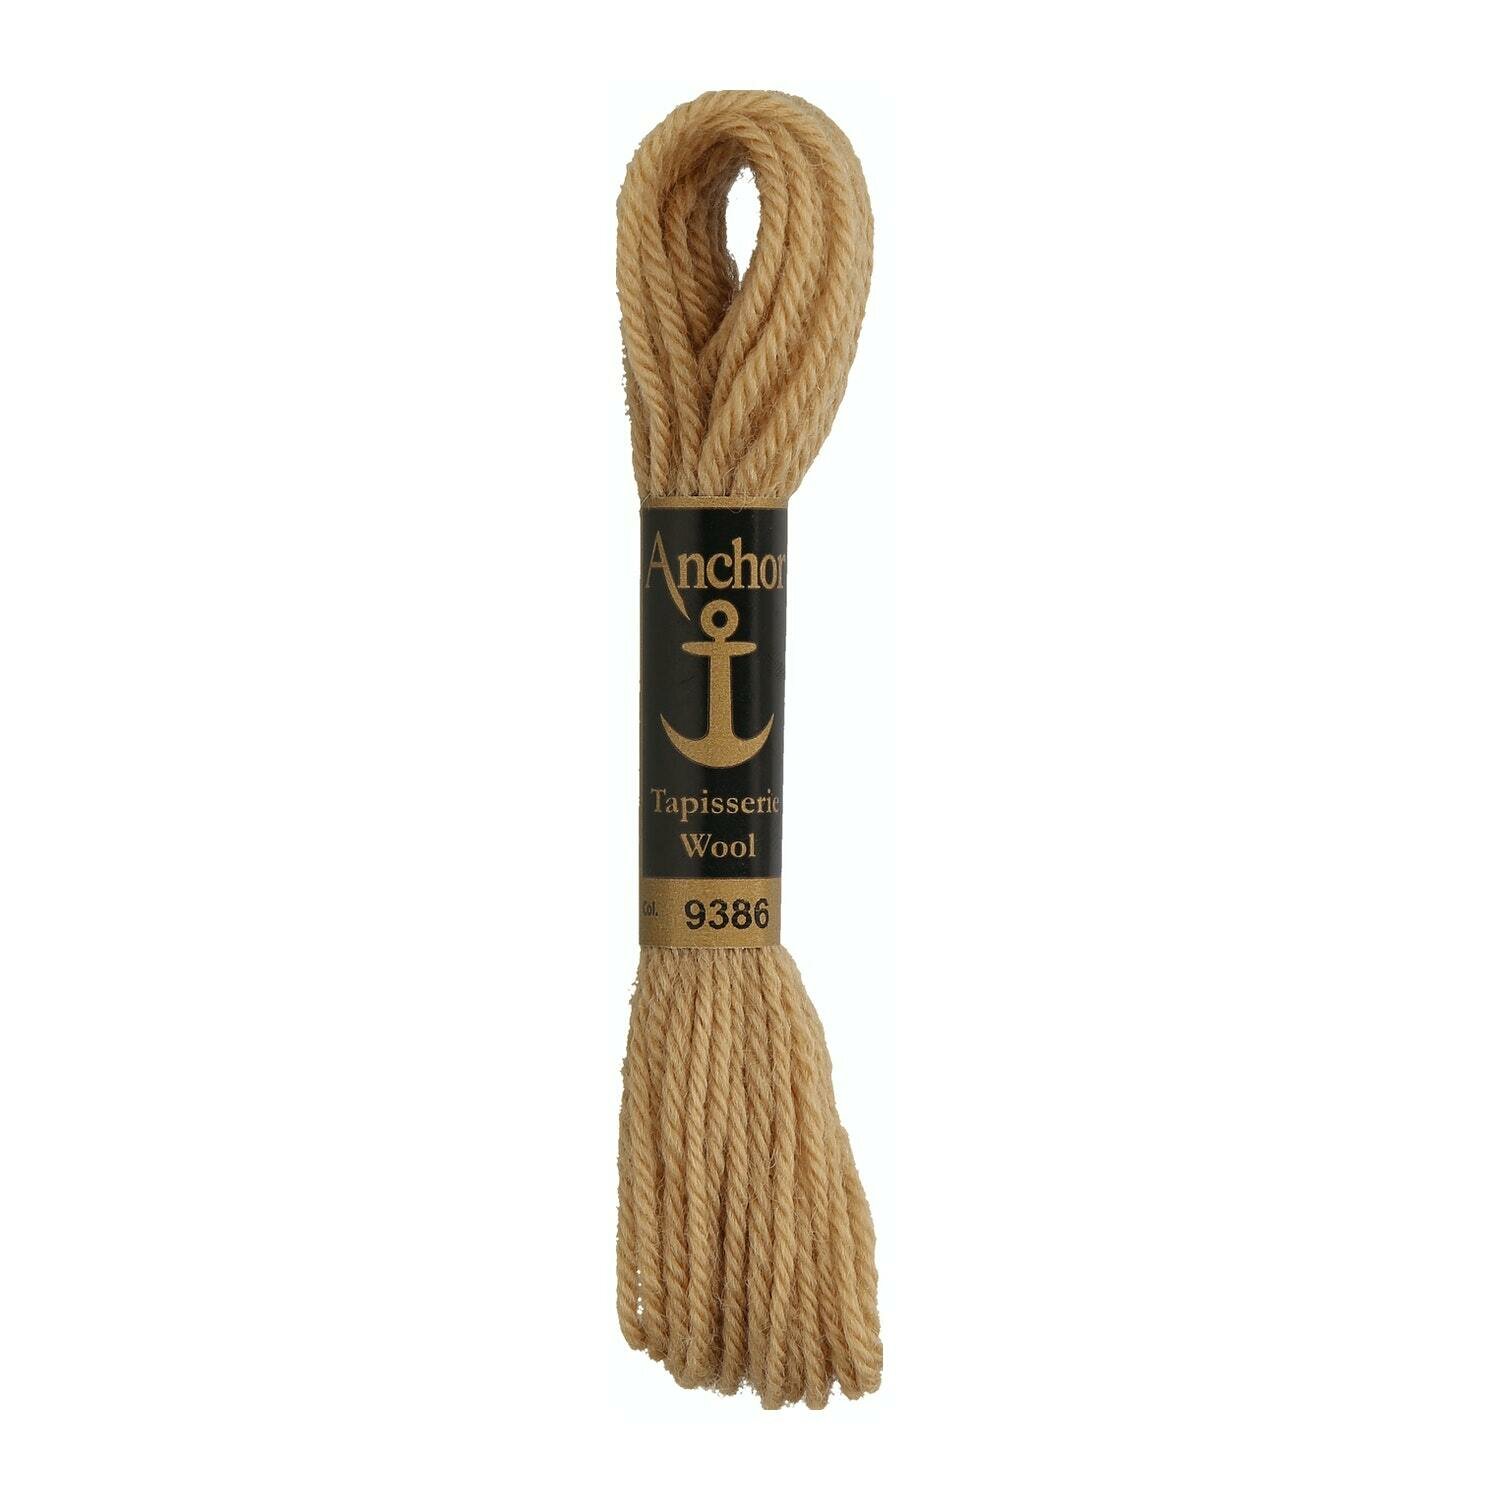 Anchor Tapisserie Wool # 09386